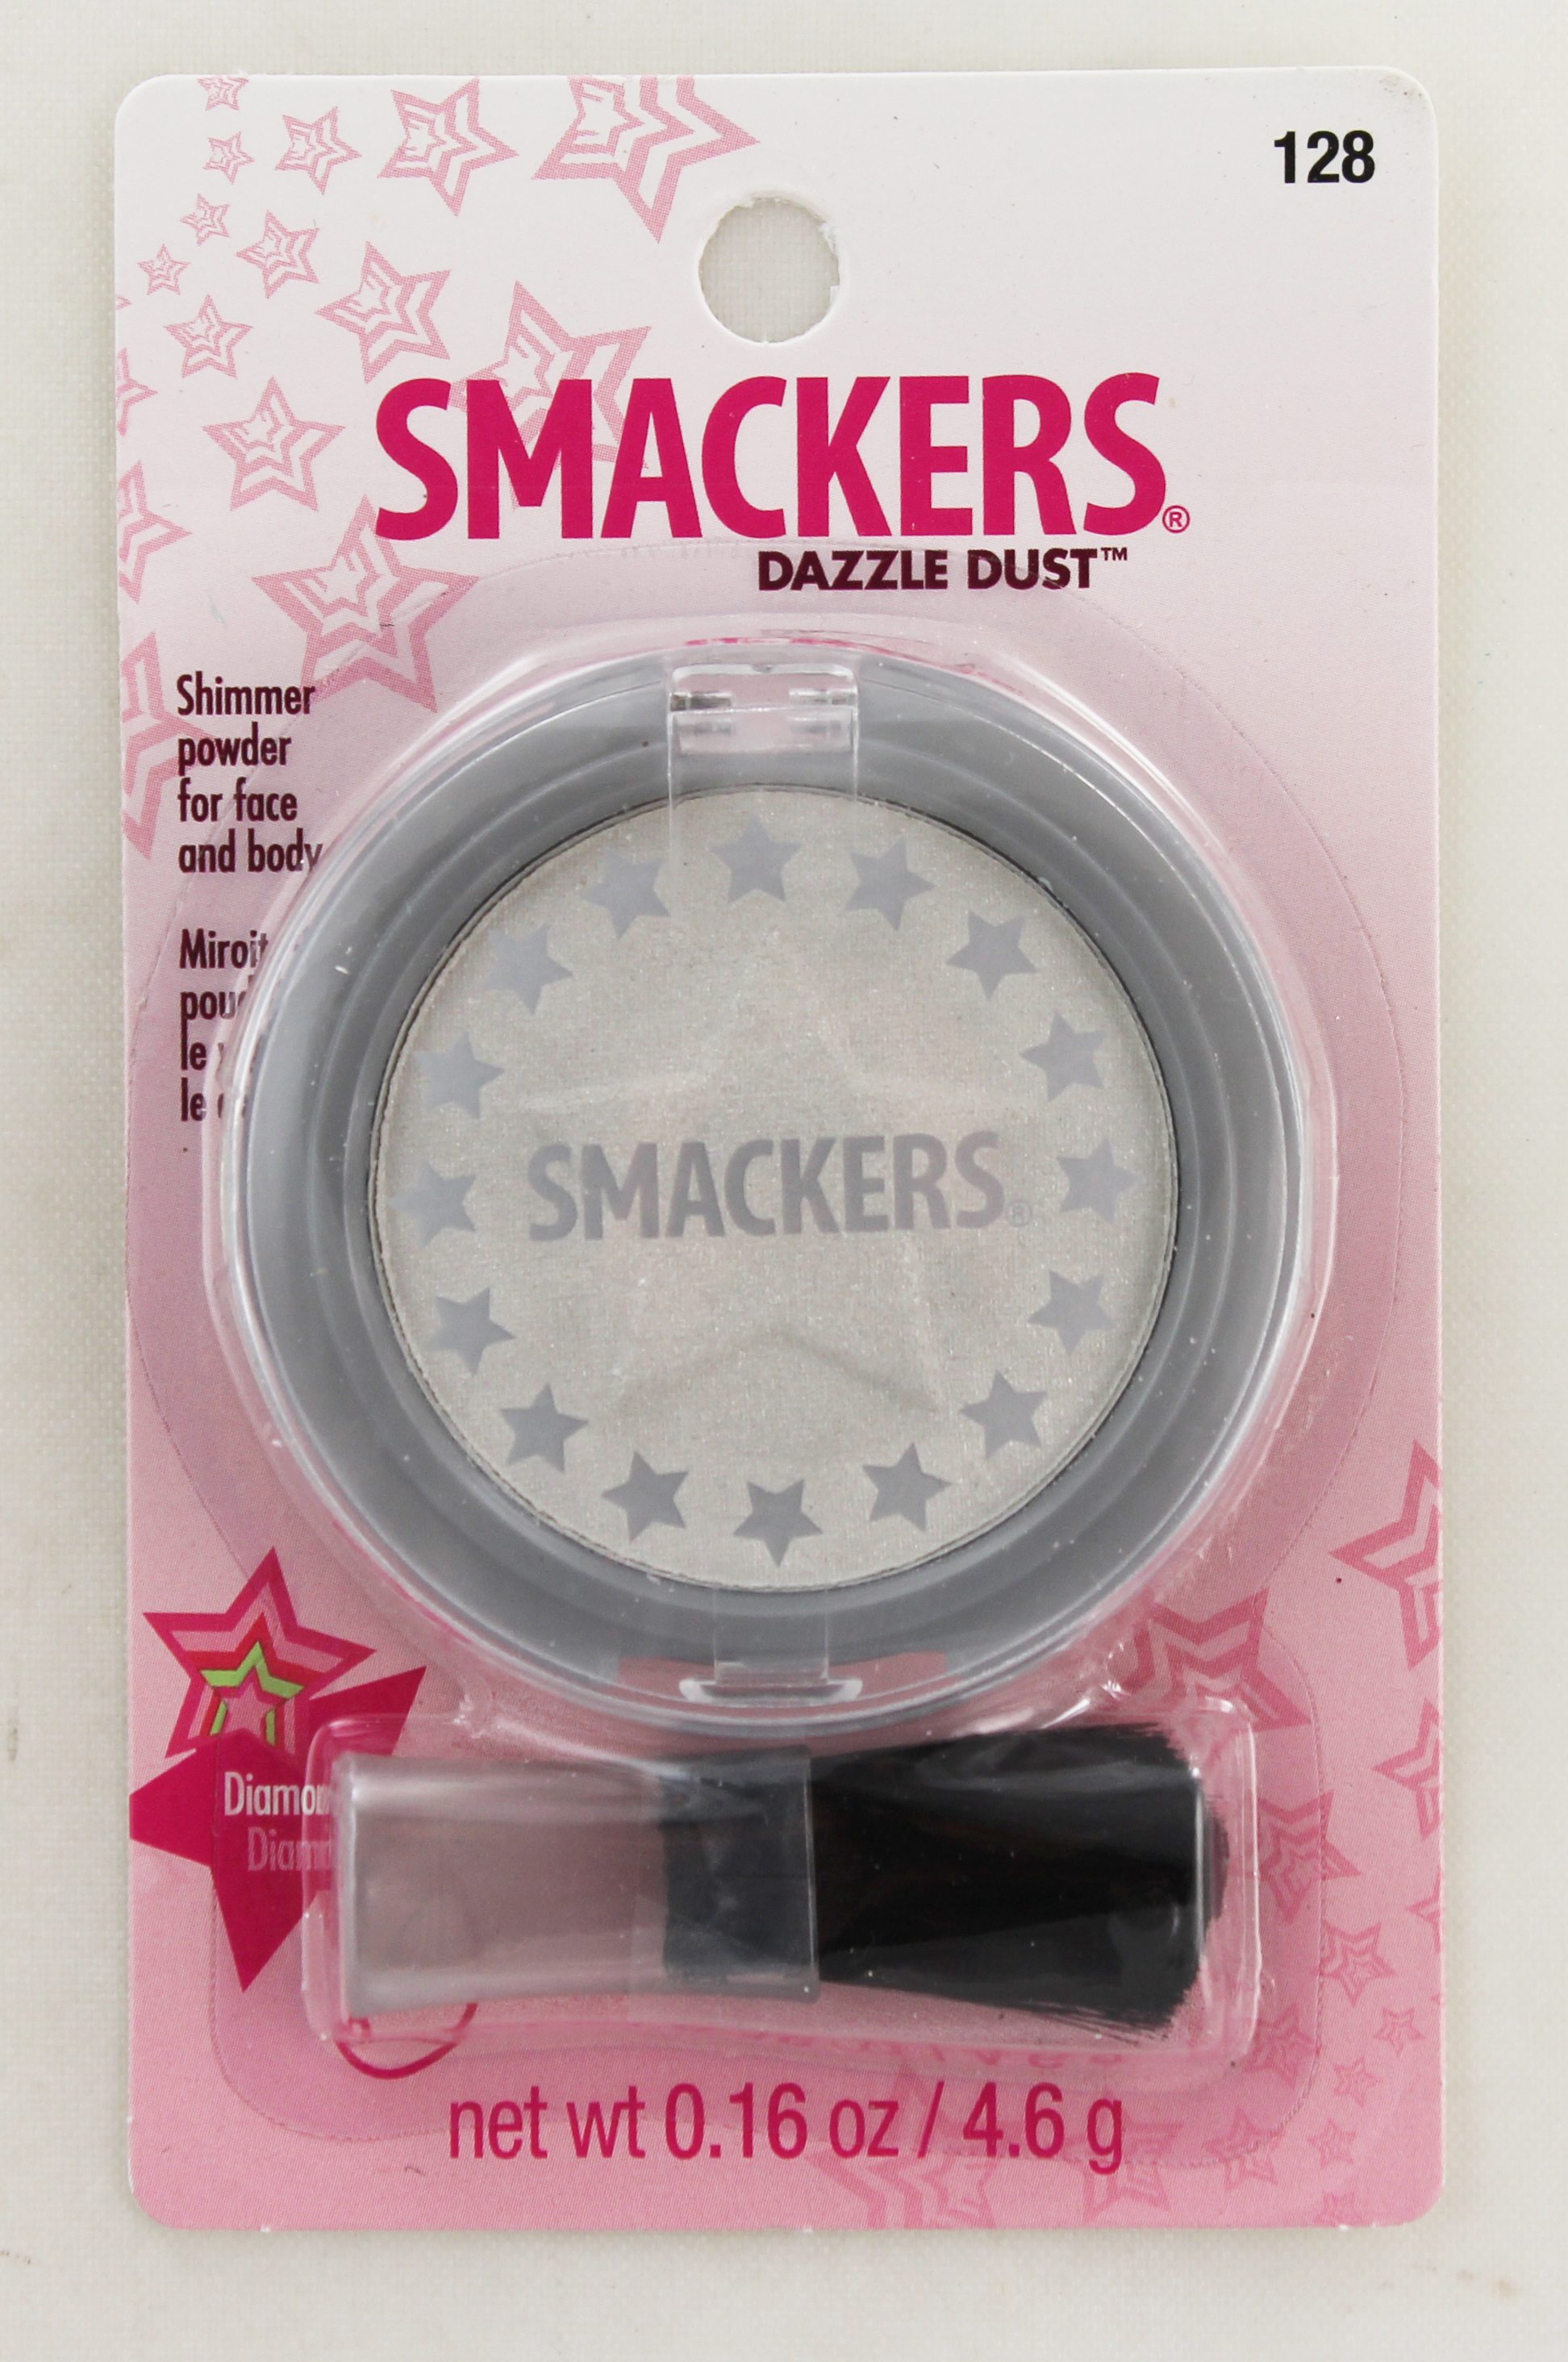 Lip Smackers Dazzle Dust Shimmer Powder For Face and Body With Applicator